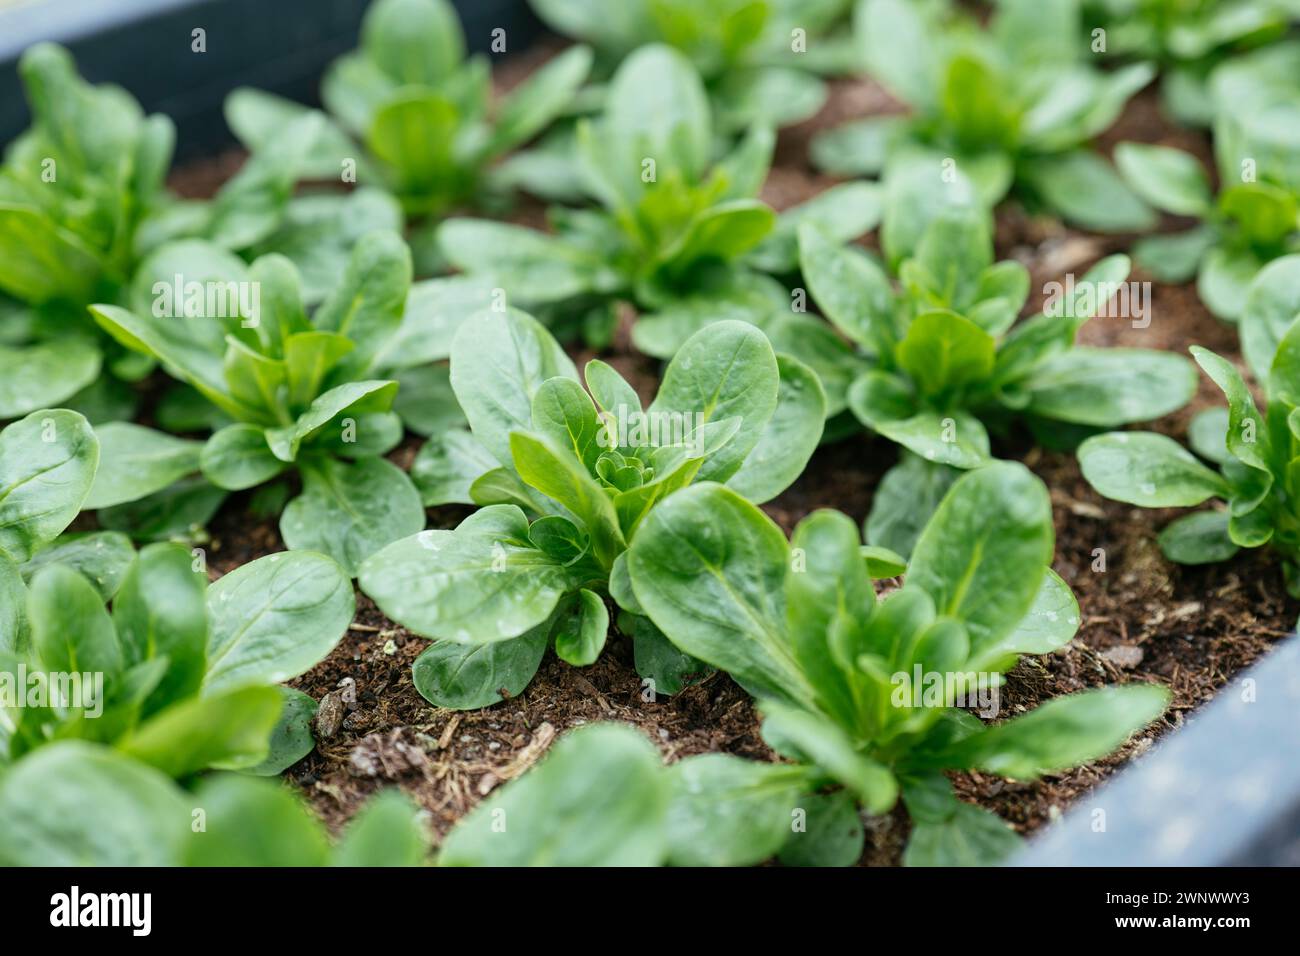 Cornsalad (Valerianella locusta) growing at the end of the winter in Germany Stock Photo